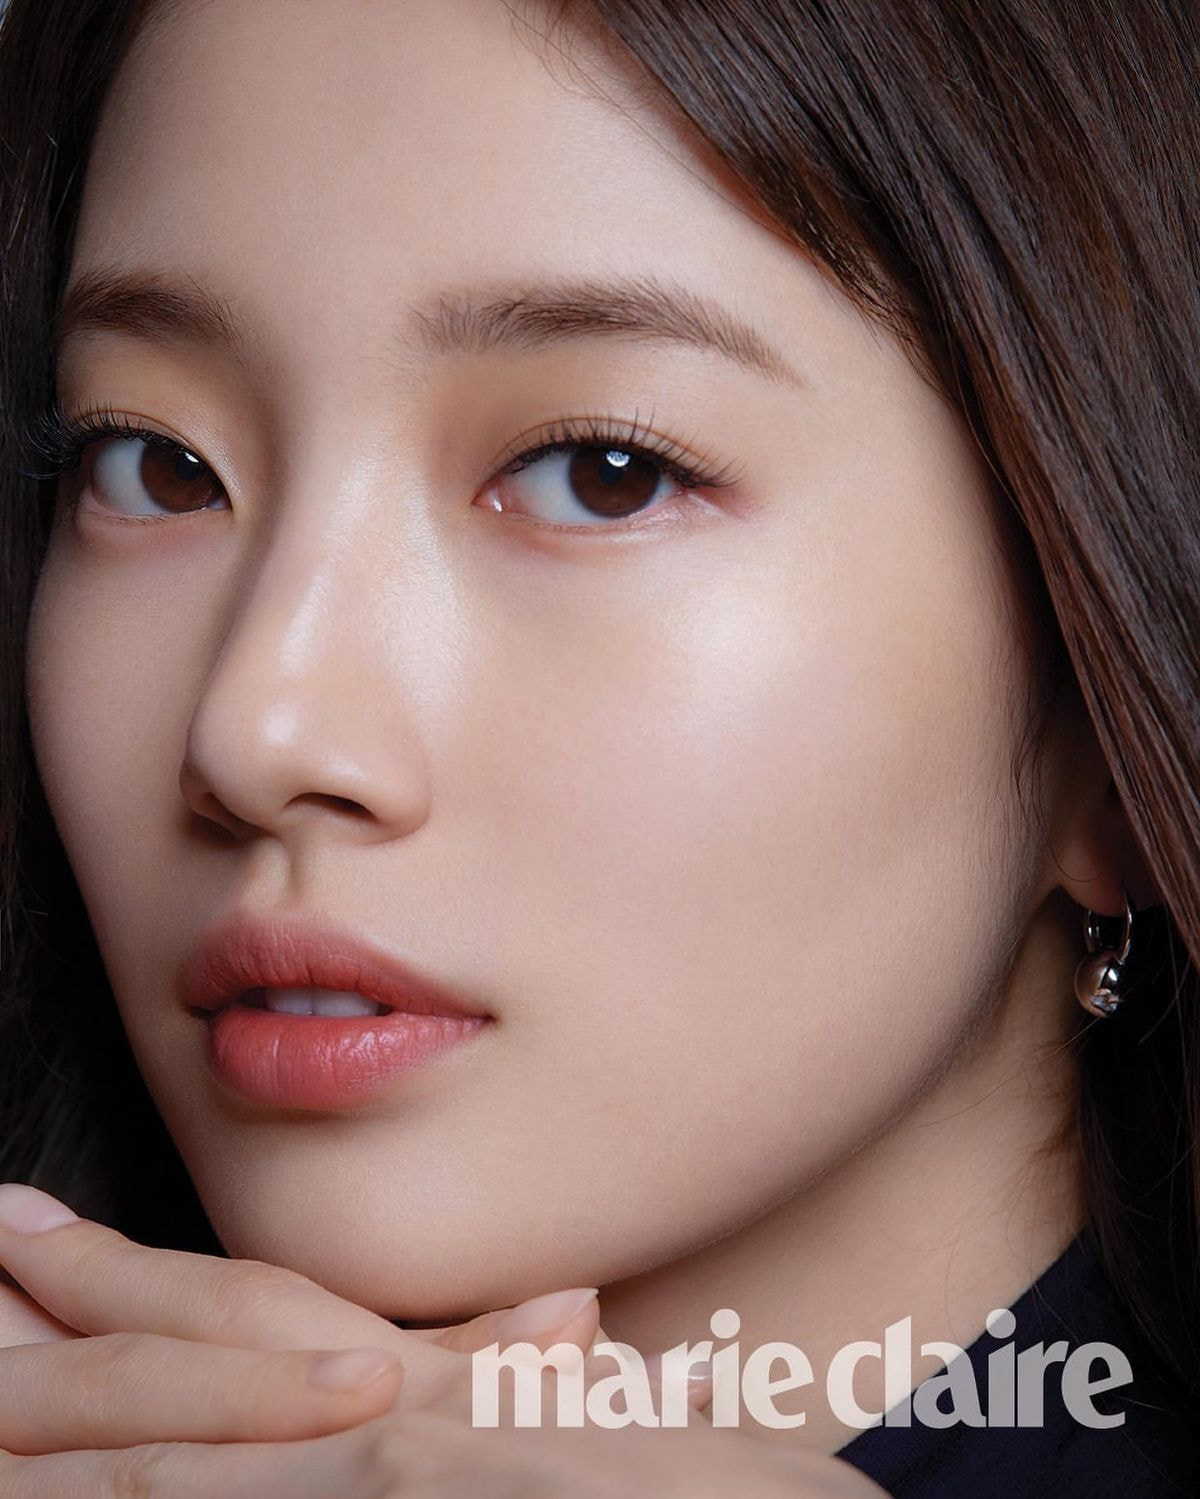 suzy-looking-extra-stunning-in-new-pictorial-for-marie-claire-magazine